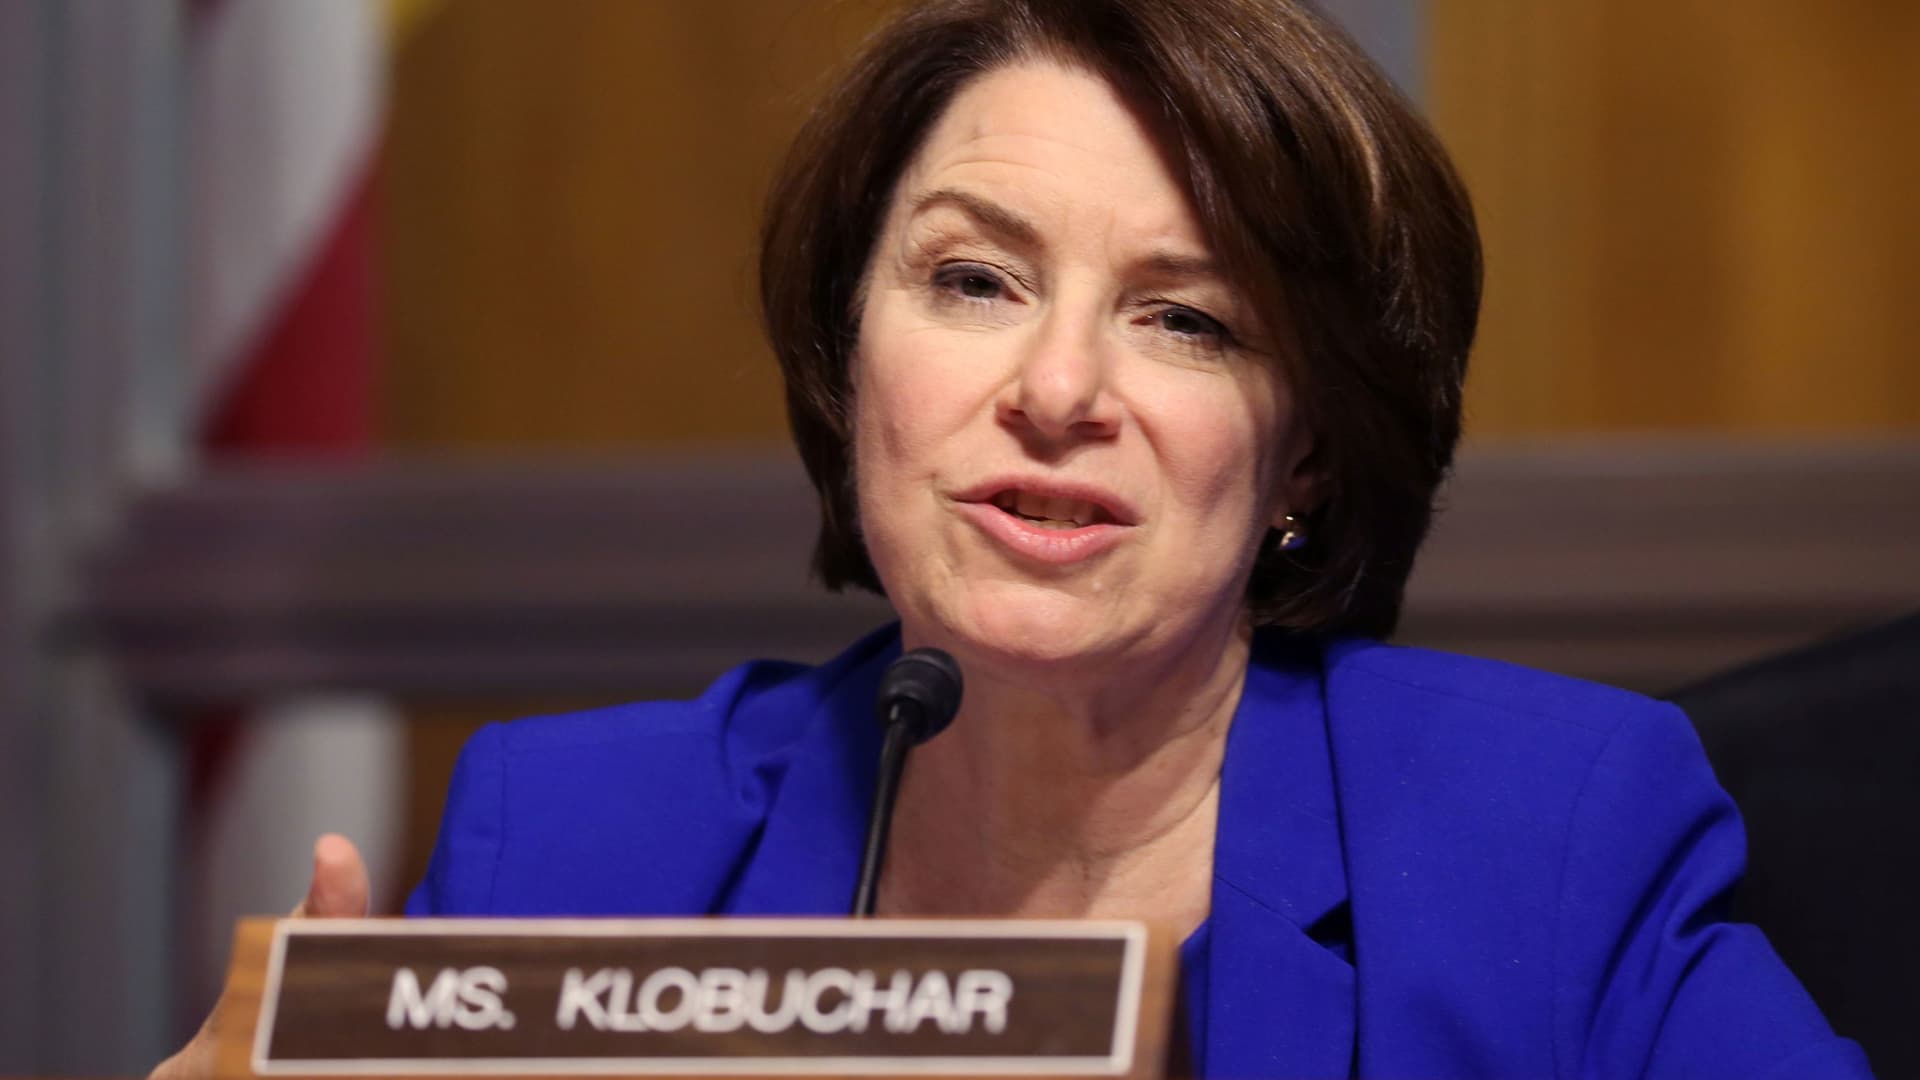 Sen. Amy Klobuchar, D-MN, asks questions during a hearing of the Senate Judiciary Subcommittee on Privacy, Technology, and the Law, at the U.S. Capitol in Washington DC, April 27, 2021.